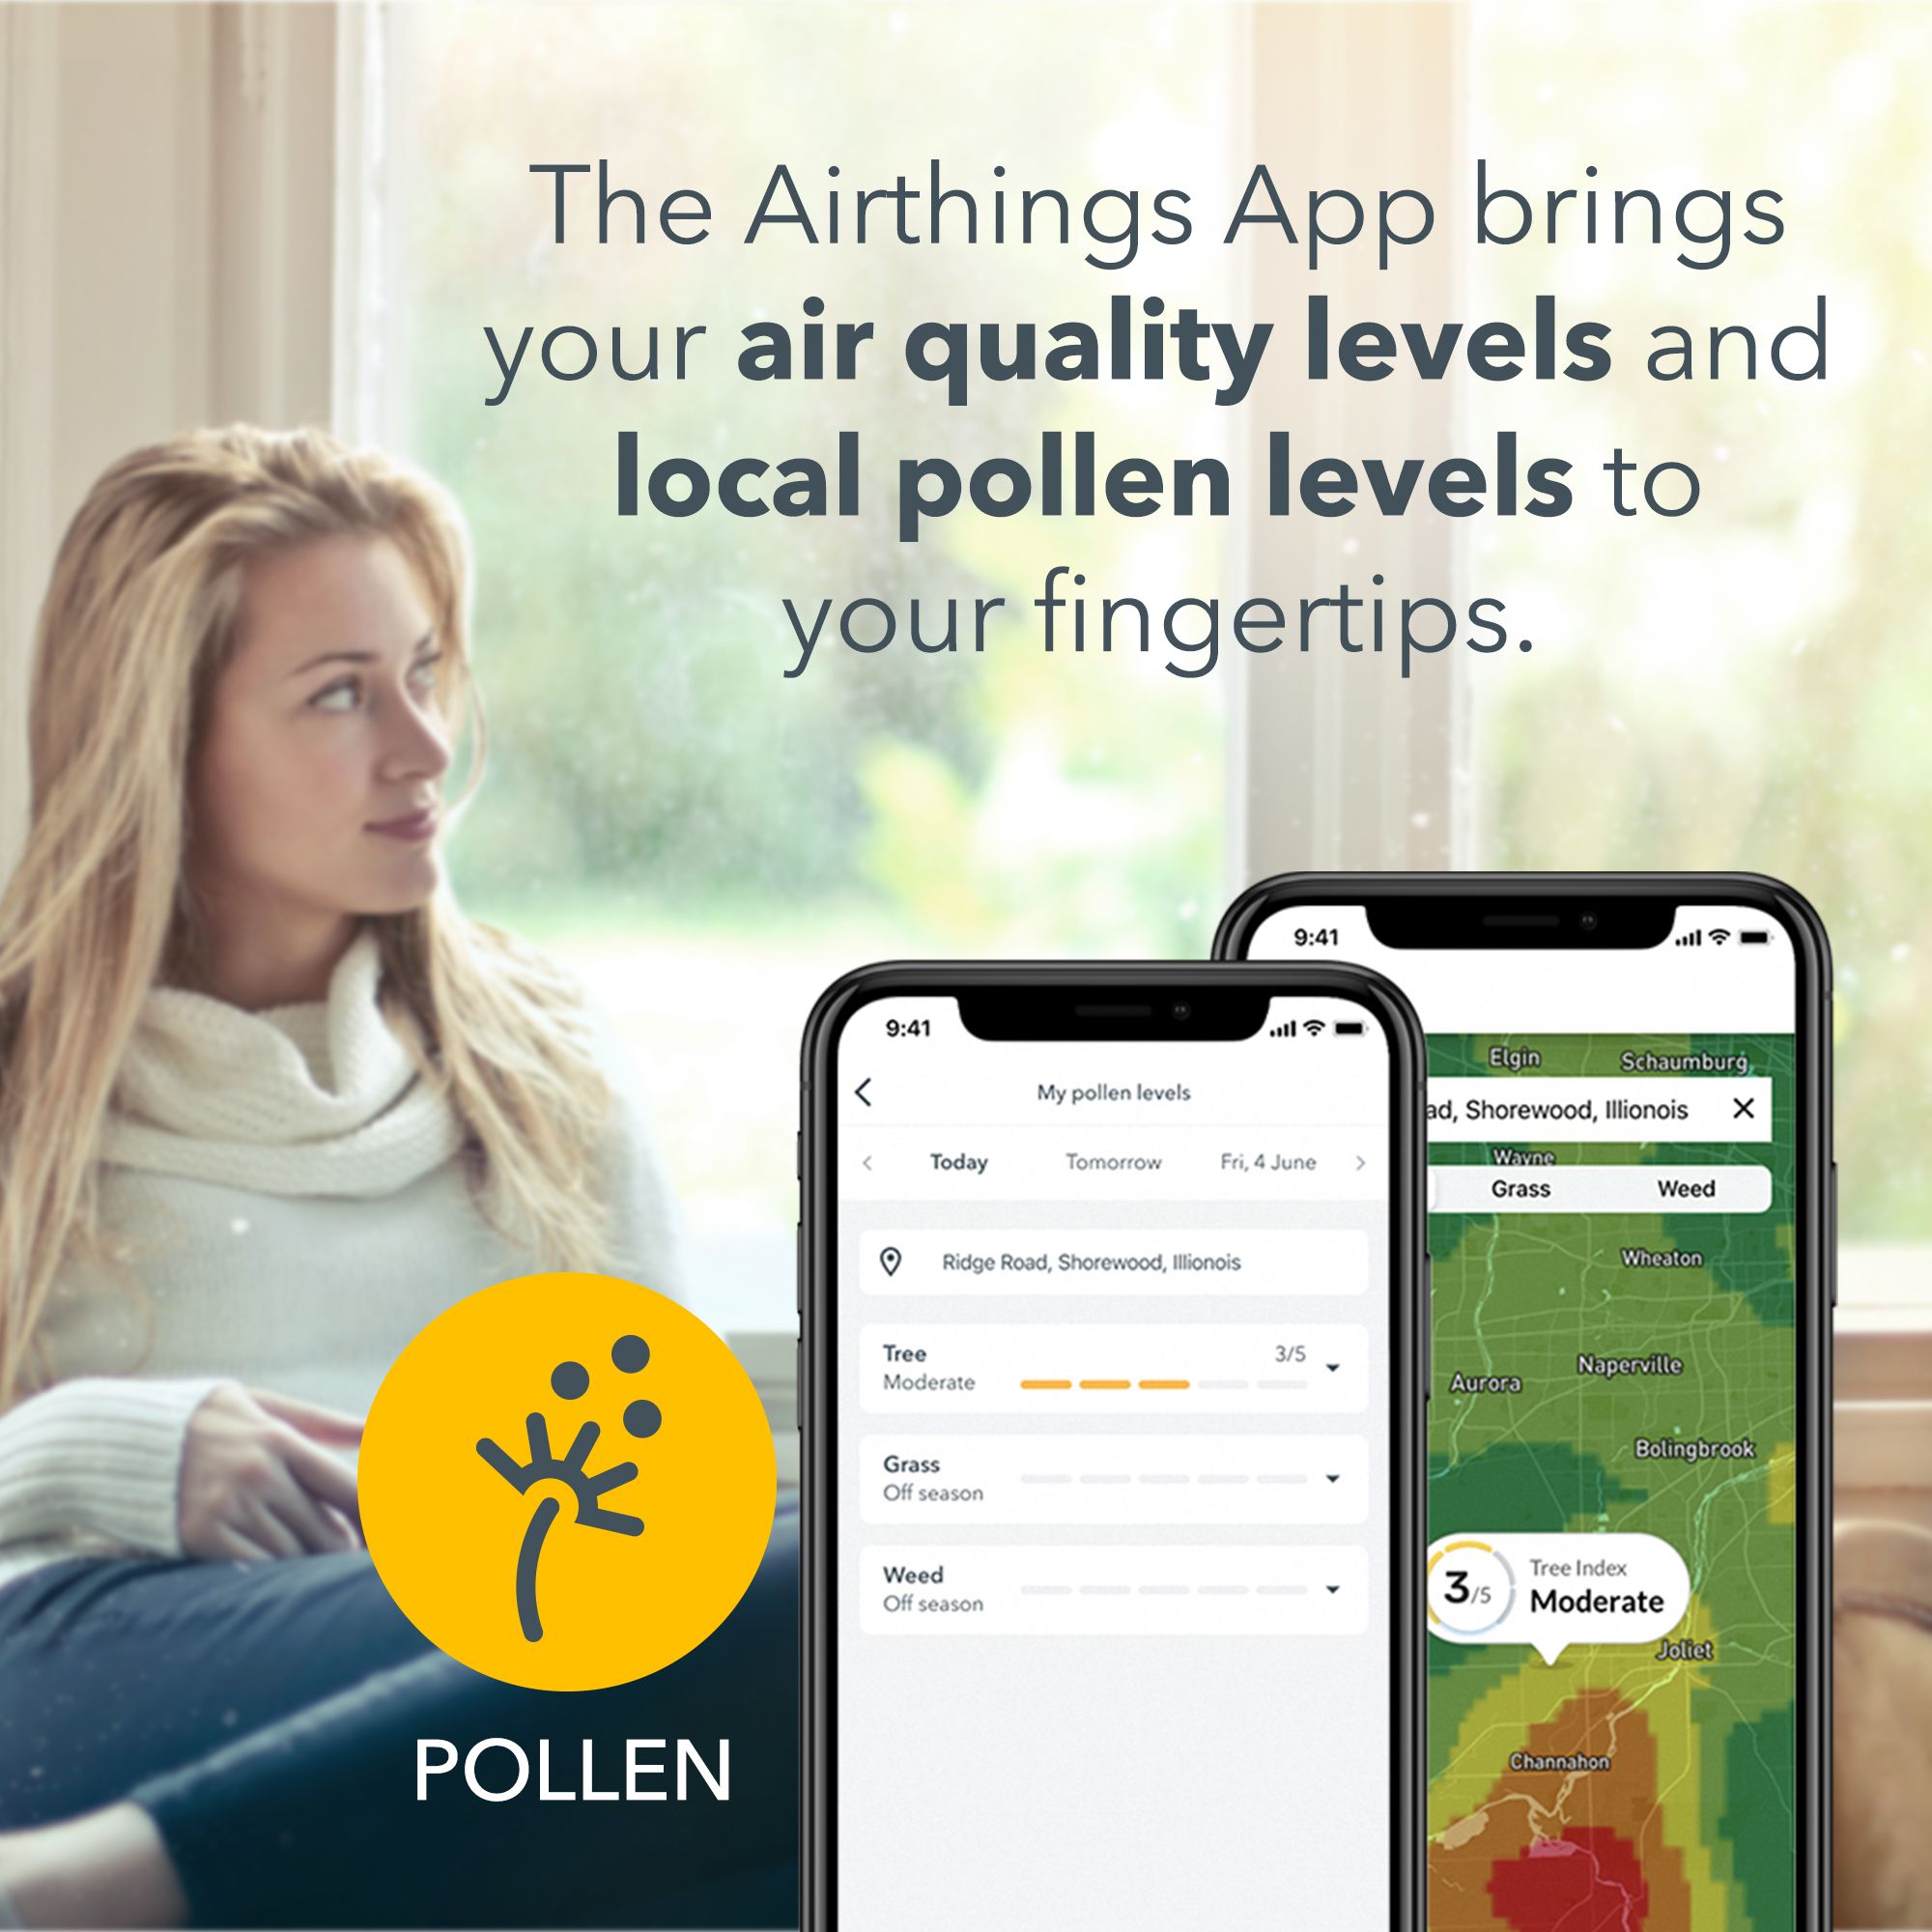 Airthings Wave Mini Smart air quality monitor